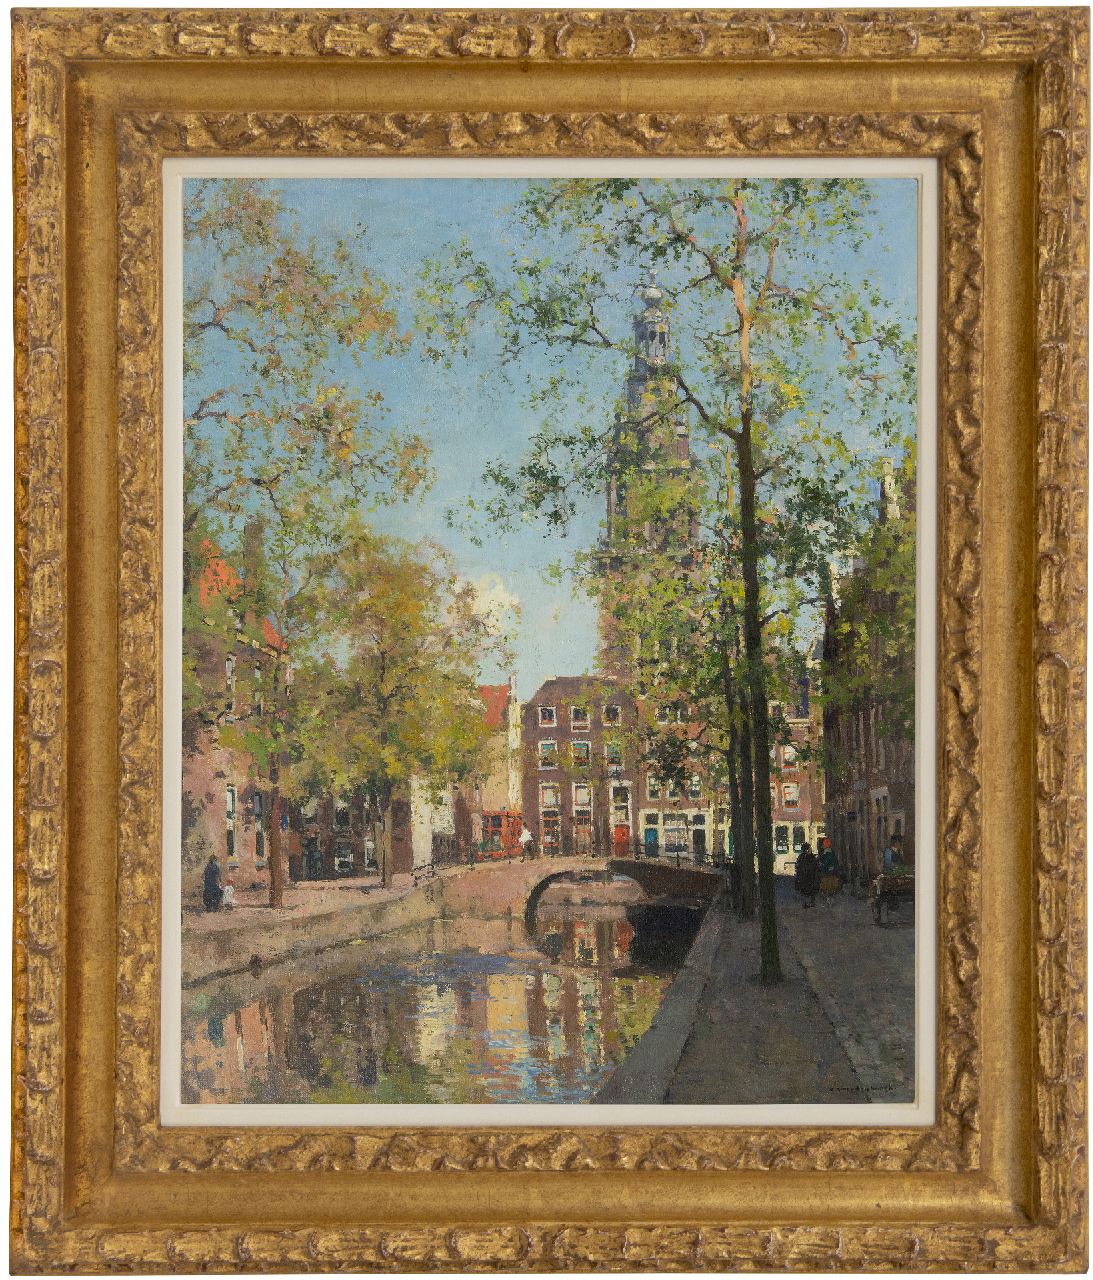 Vreedenburgh C.  | Cornelis Vreedenburgh | Paintings offered for sale | The Groenburgwal in Amsterdam with the tower of the Zuiderkerk, oil on canvas 73.4 x 59.3 cm, signed l.r.